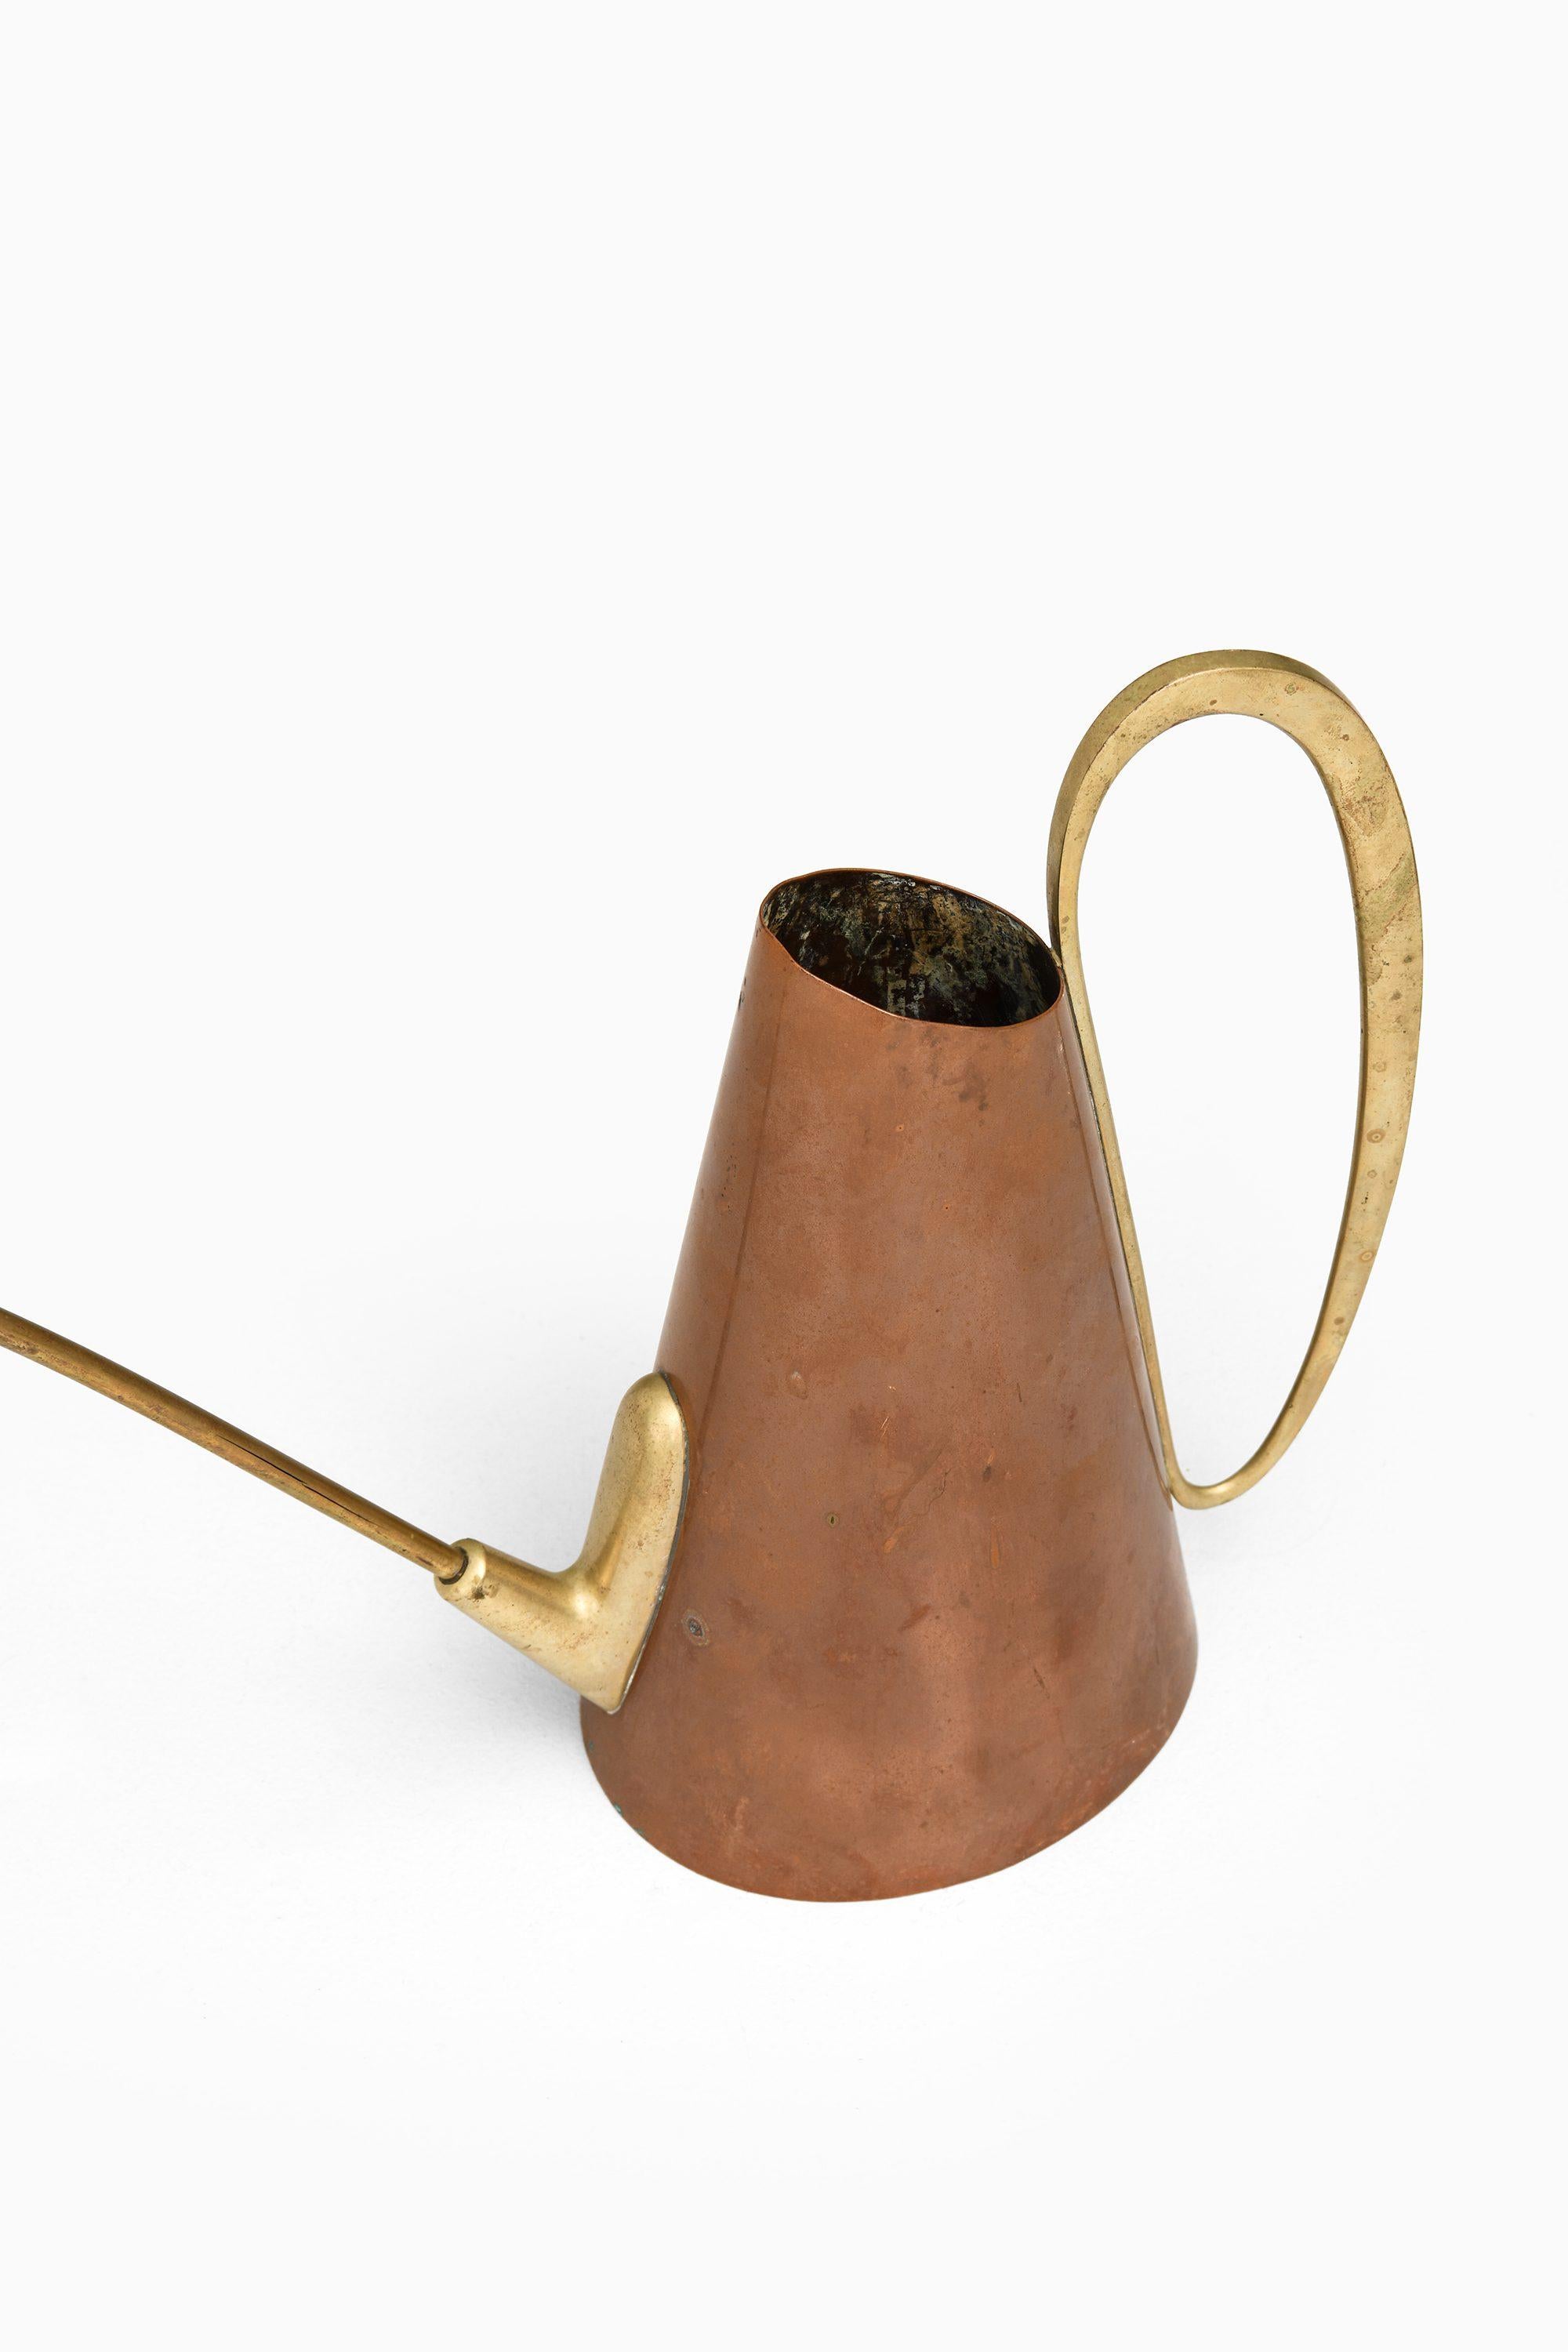 Rare Watering Can in Brass and Copper by Carl Auböck, 1950's

Additional Information:
Material: Brass and copper
Style: Mid century, Scandinavia
Produced in Denmark by Illums Bolighus
Dimensions (W x D x H): 45 x 11 x 35 cm
Condition: Good vintage